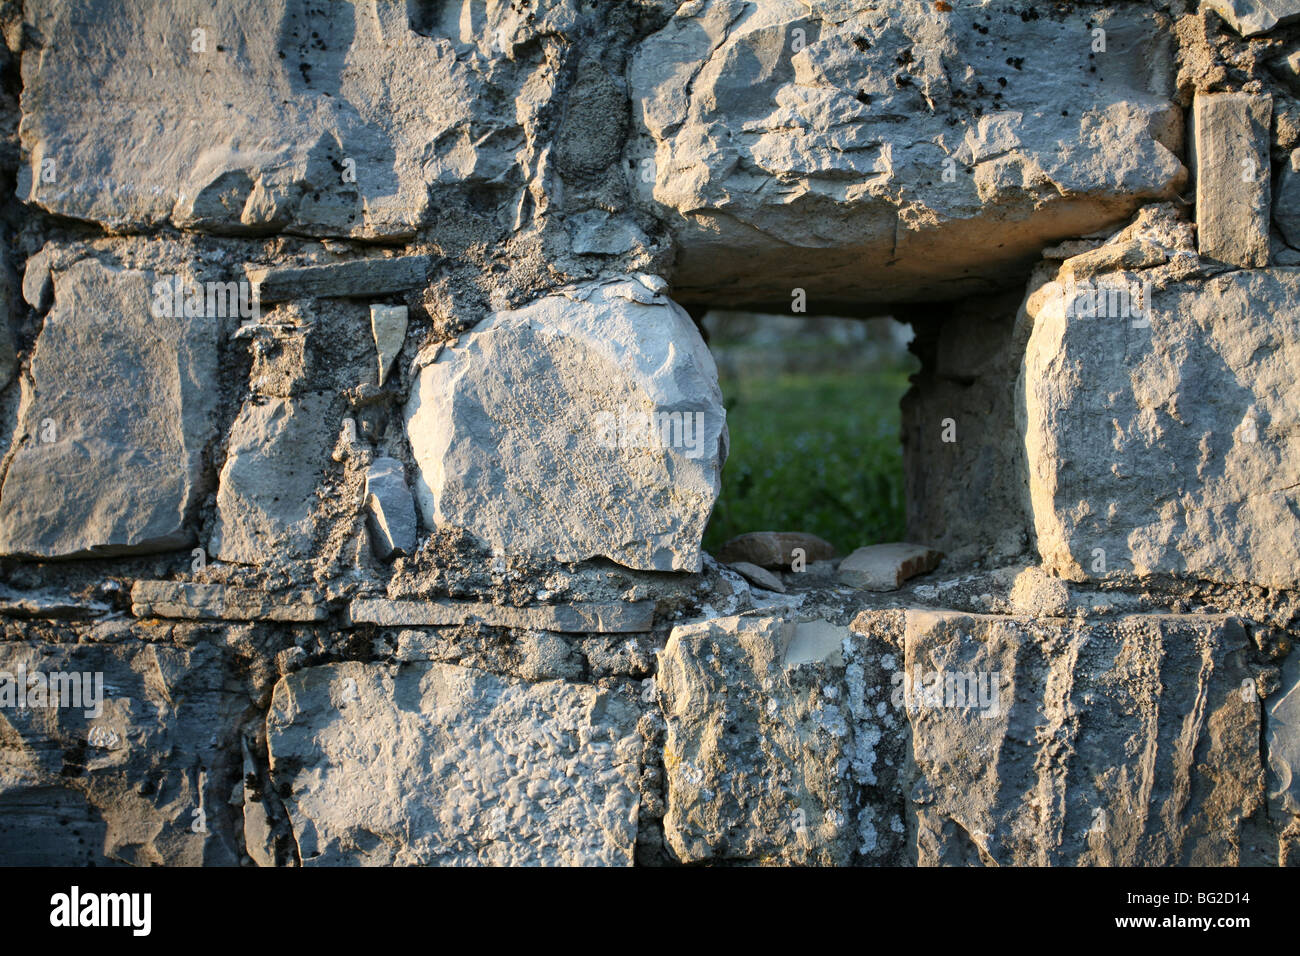 Small window opening through old stone wall, grass visible Stock Photo